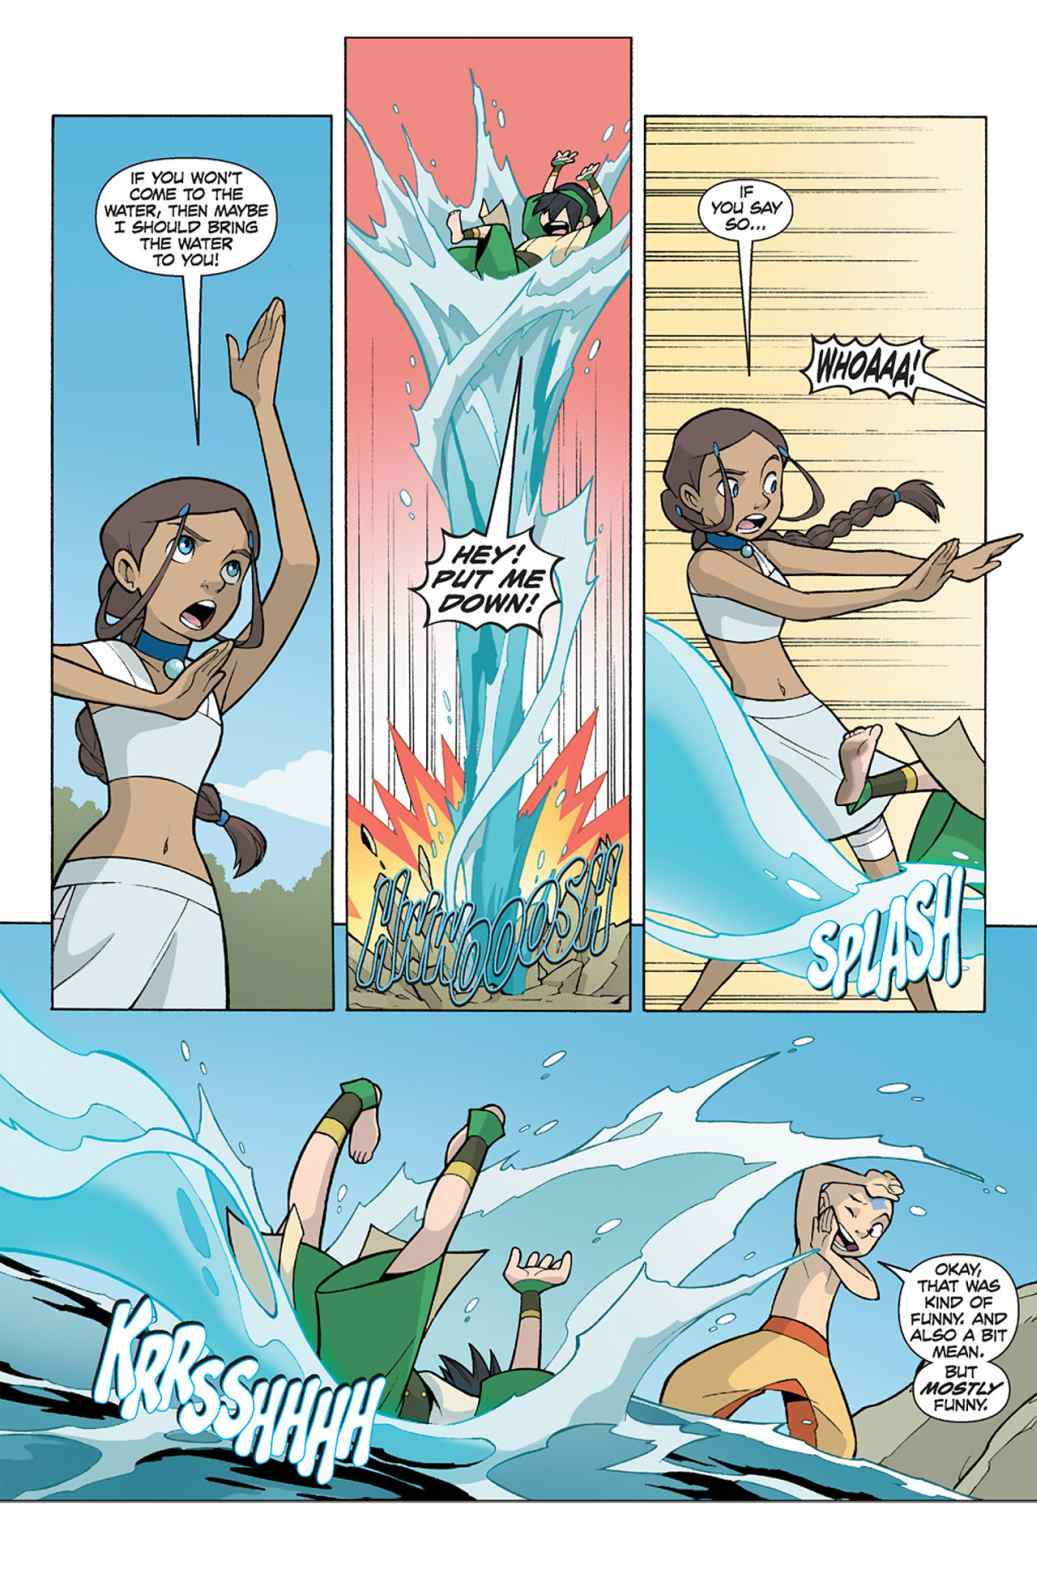 Read Comics Online Free - Avatar The Last Airbender Comic Book Issue  # - Page 15